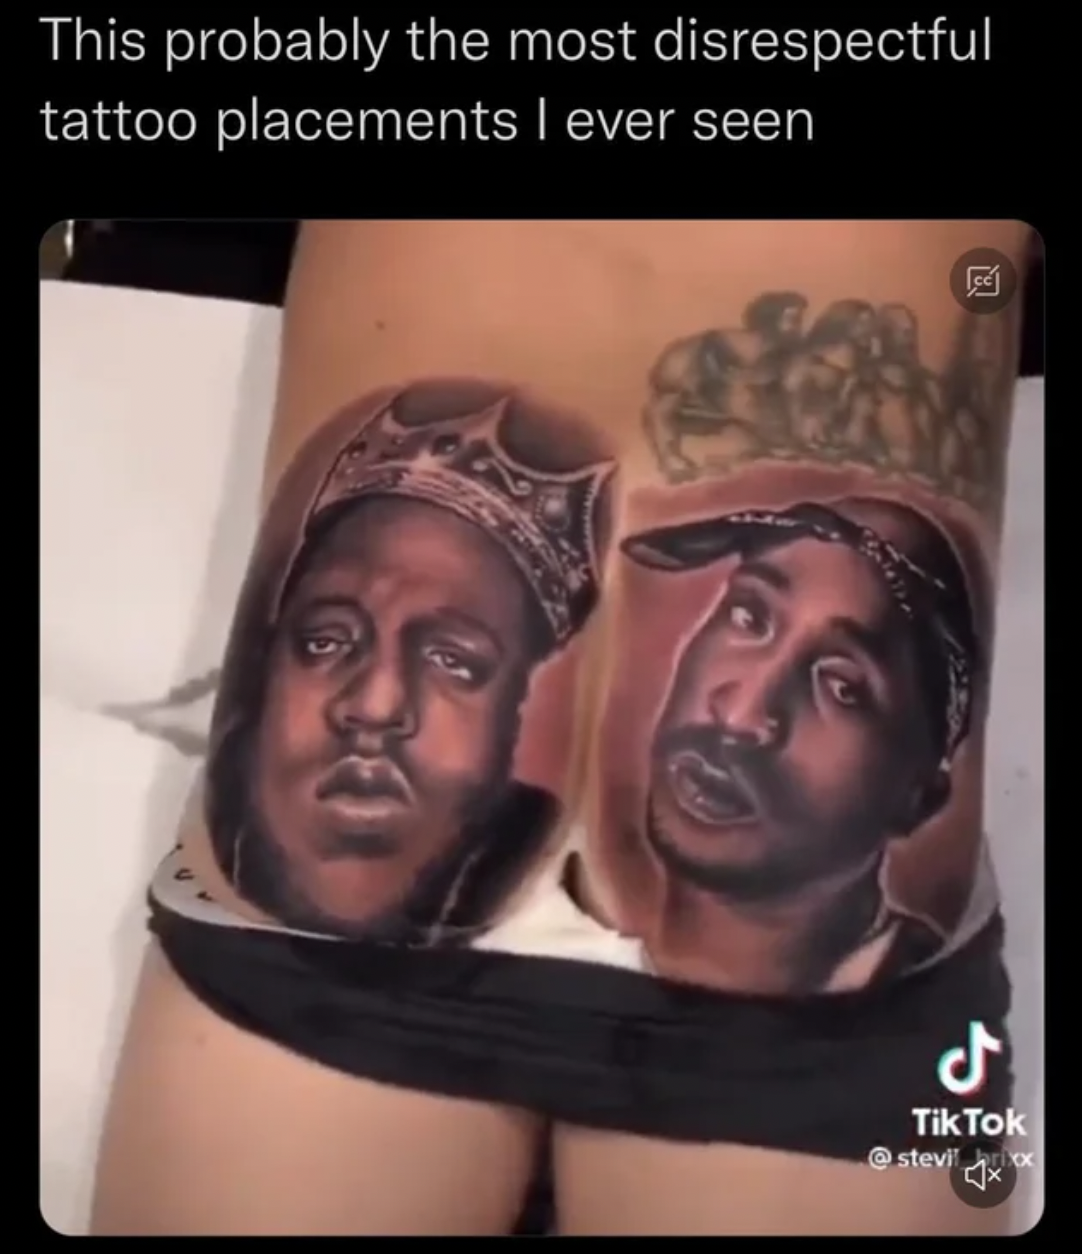 "This probably the most disrespectful tattoo placements I've ever seen"